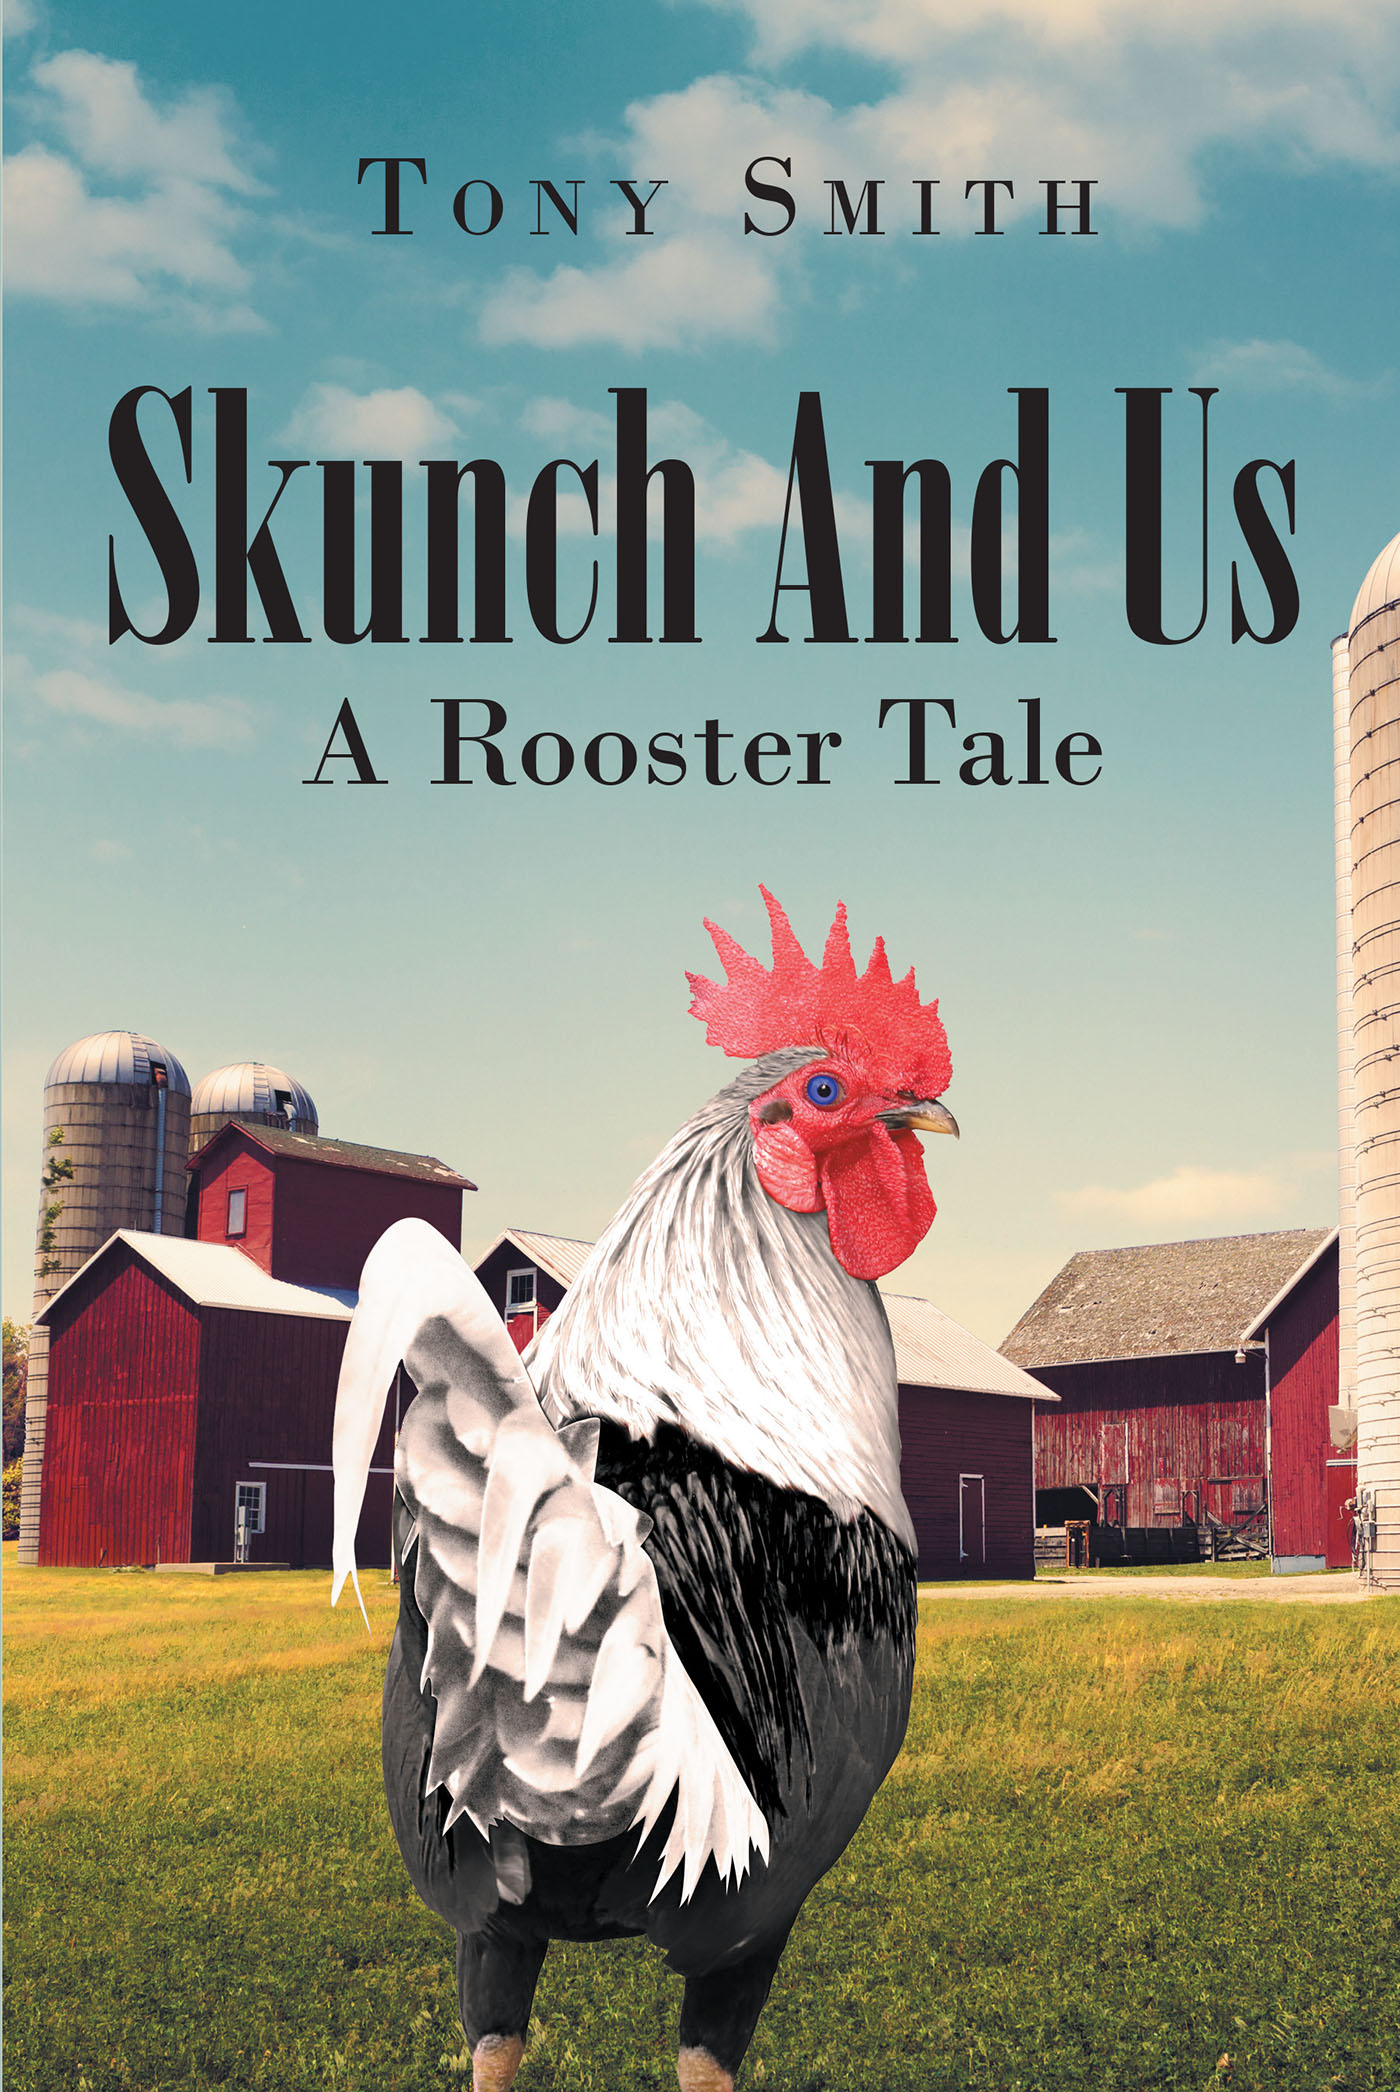 Author Tony Smith’s New Book, "Skunch and Us: A Rooster Tale," is a Charming Bird’s-Eye View of Life for a Young Rooster Learning How to Take Care of Himself & His Flock